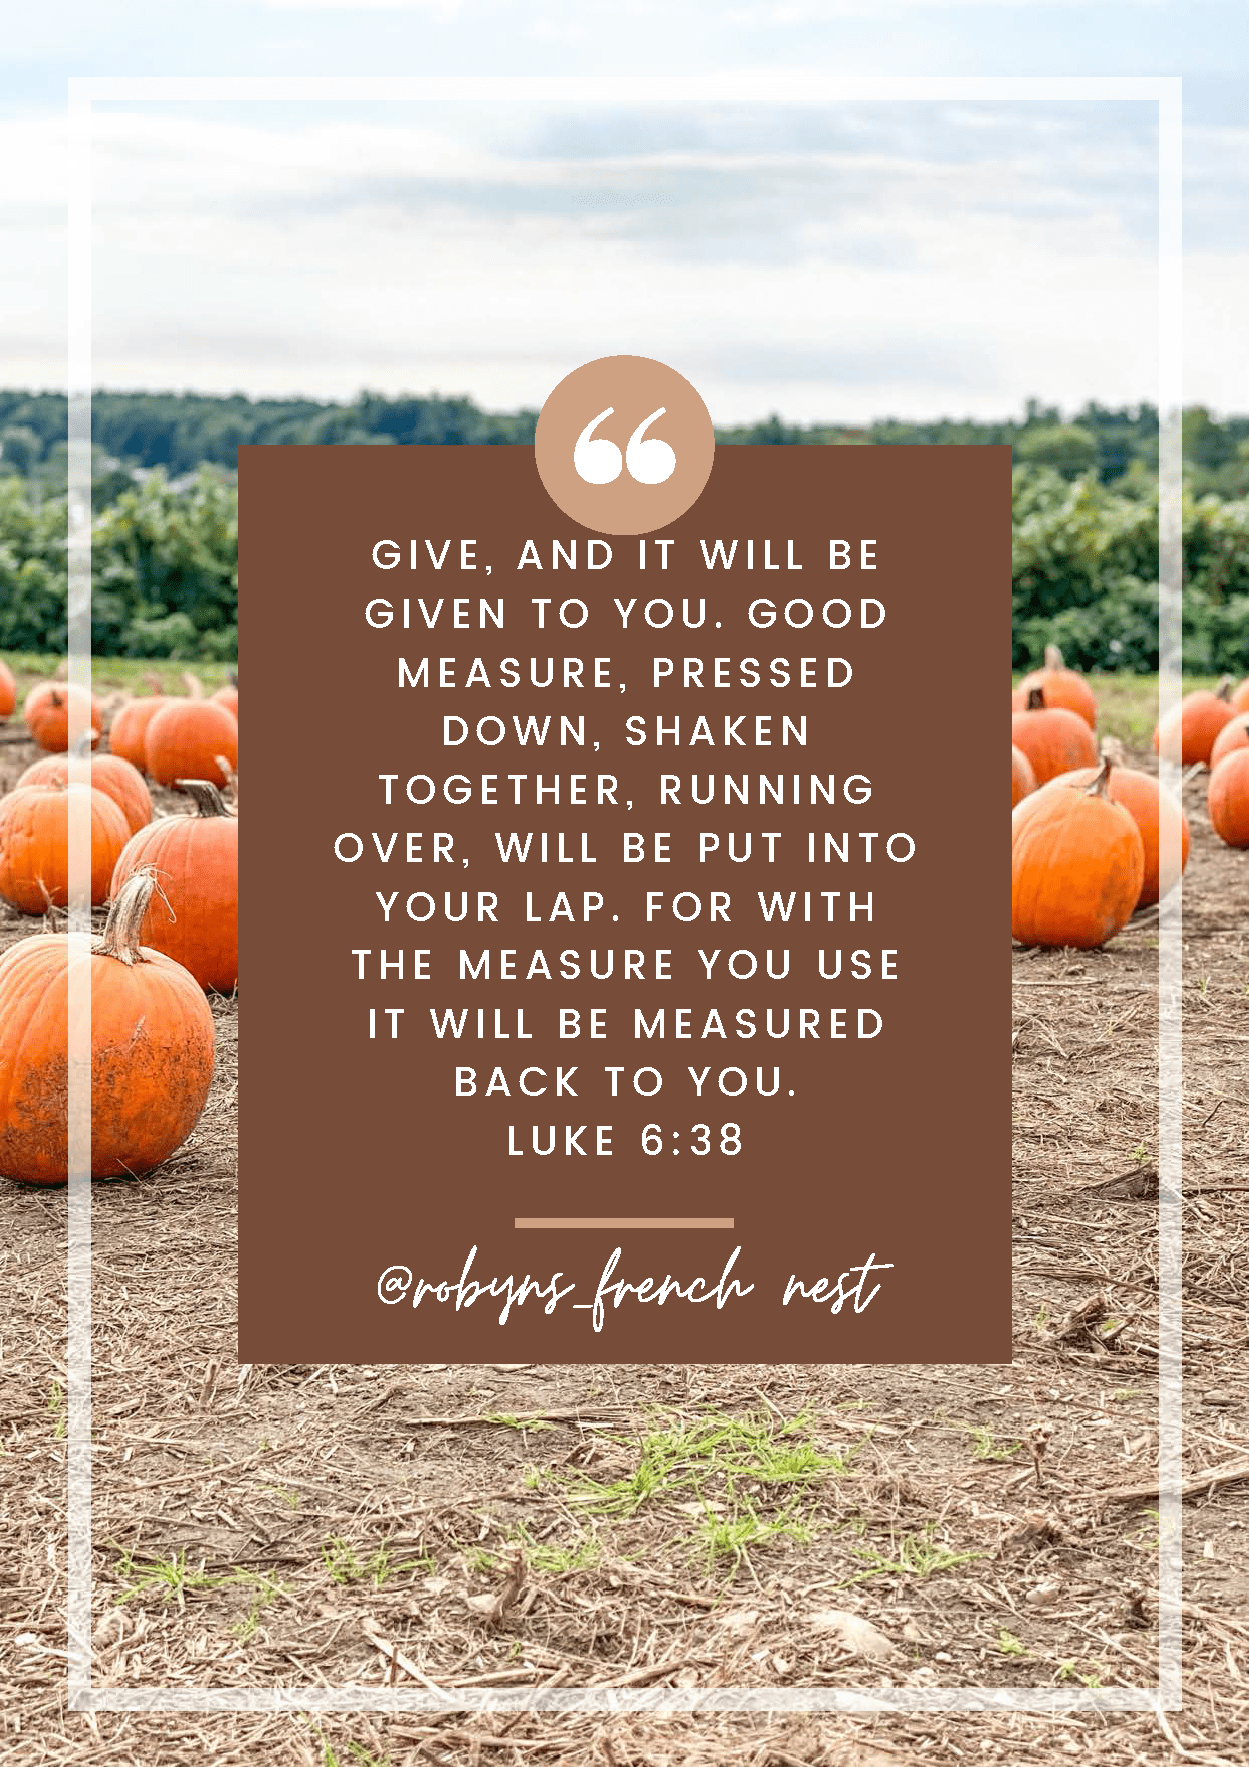 Image of a pumpkin patch overlaid with a Bible verse about generosity